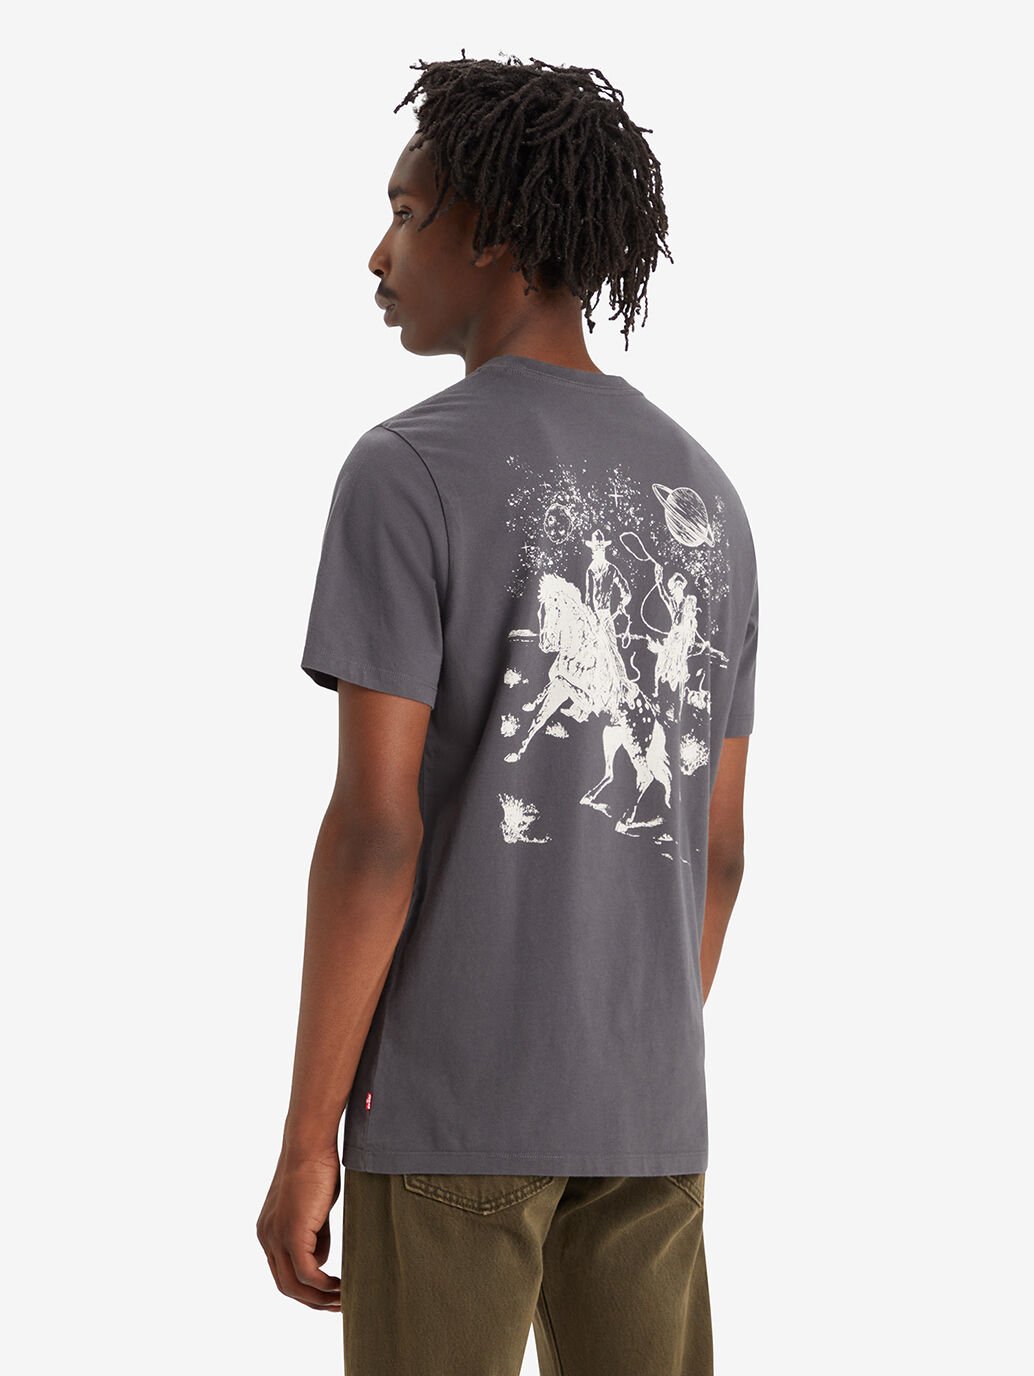 224911489 Mens Classic Graphic T-Shirt | Space Cowboy Andesite Ash